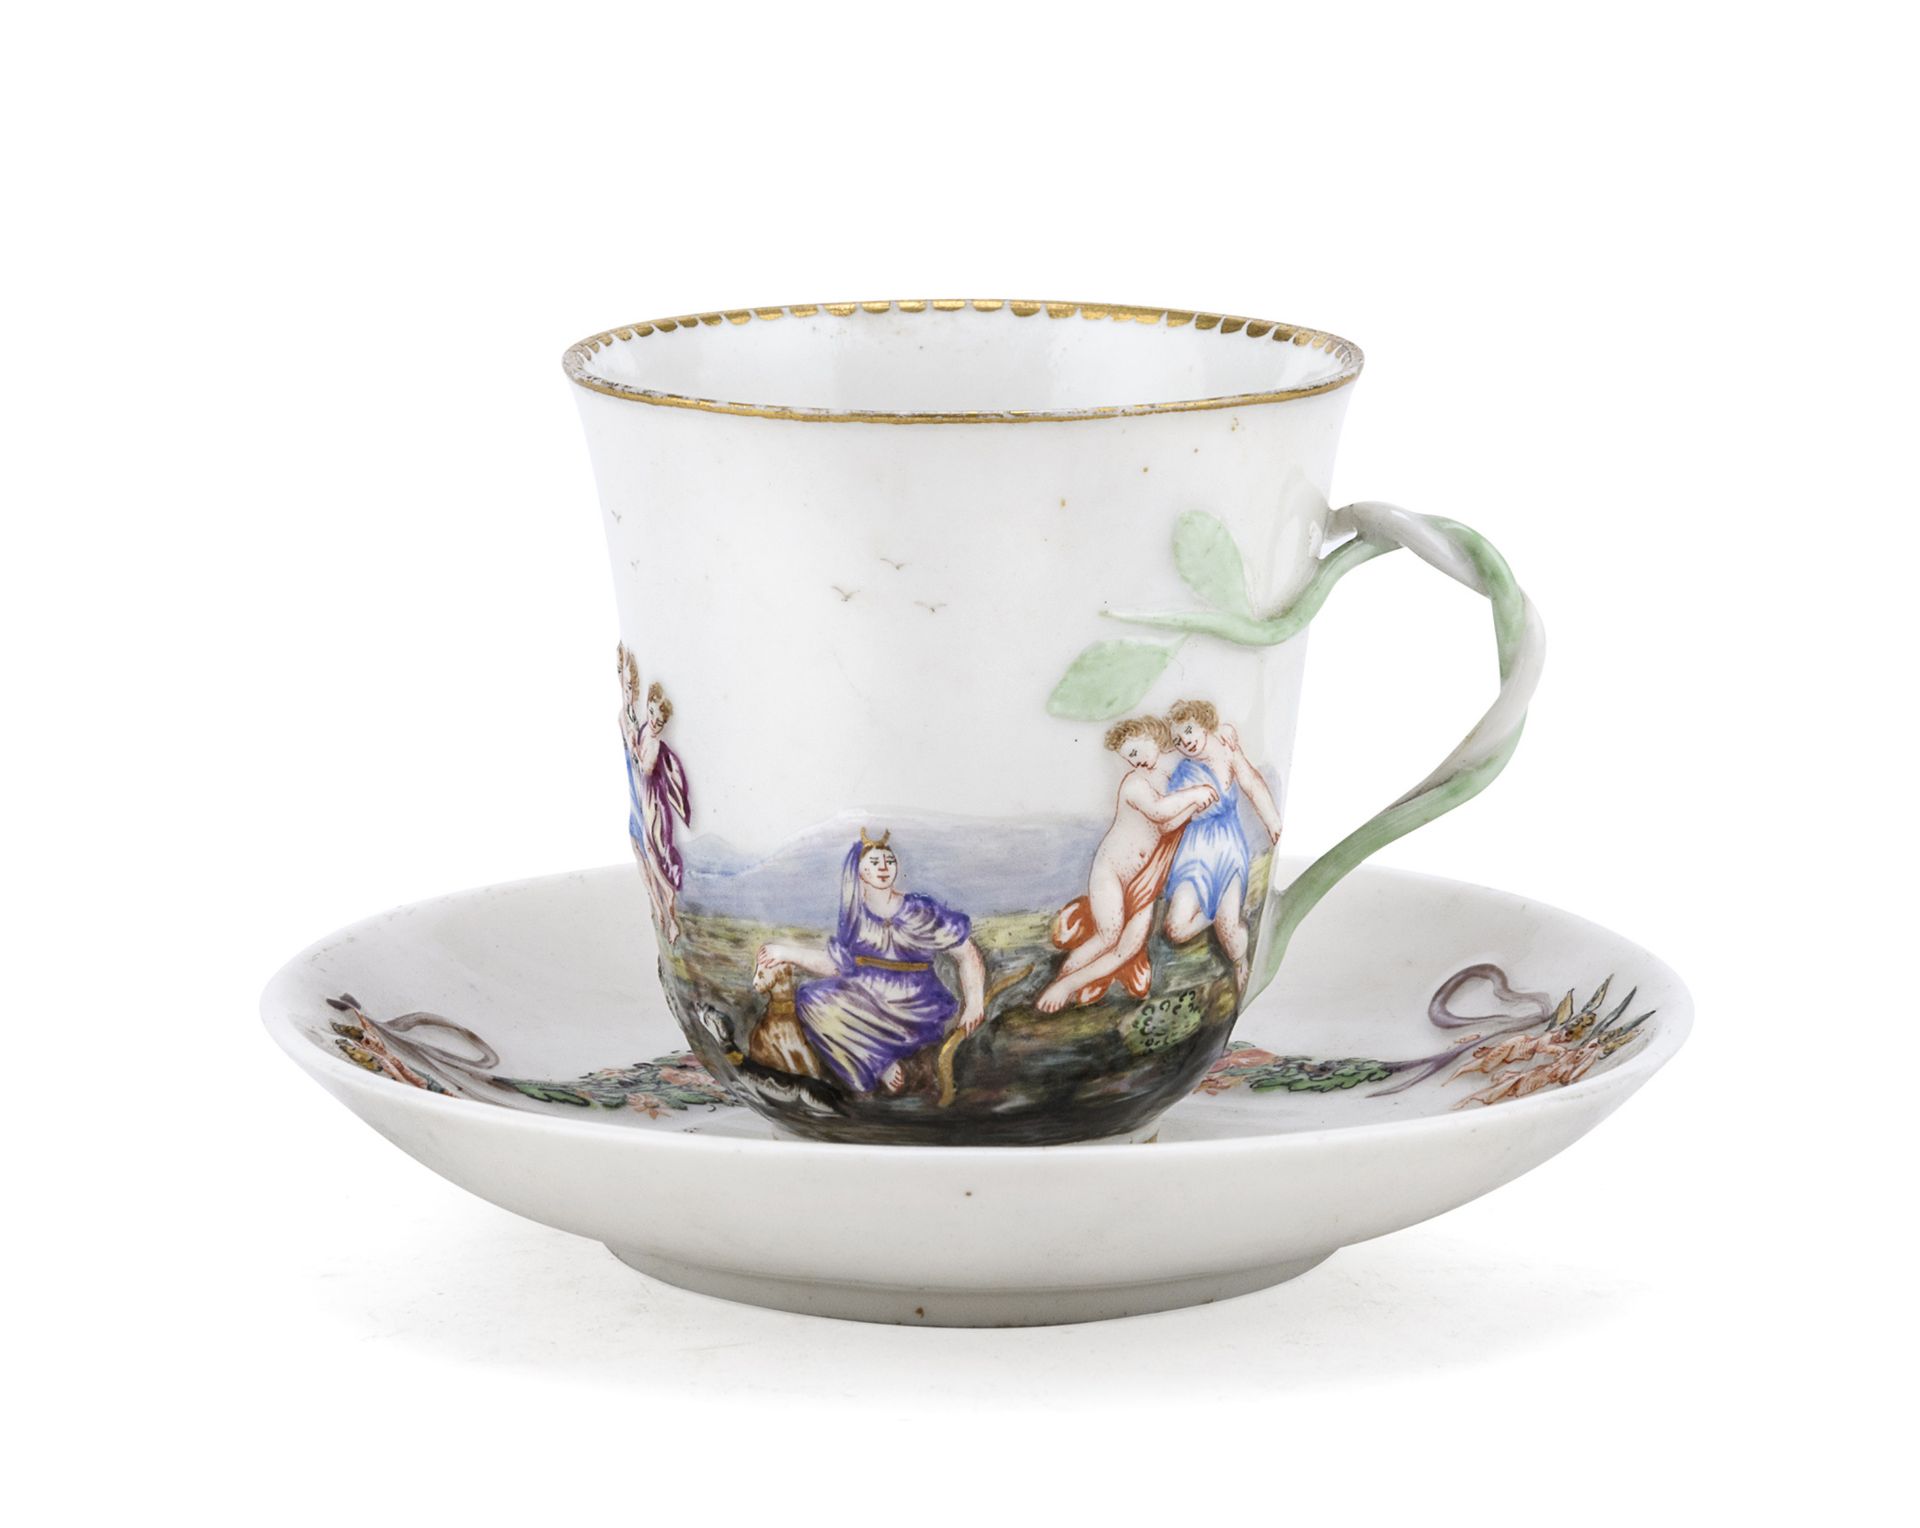 PORCELAIN CUP AND SAUCER GINORI END OF 19TH CENTURY - Image 2 of 2